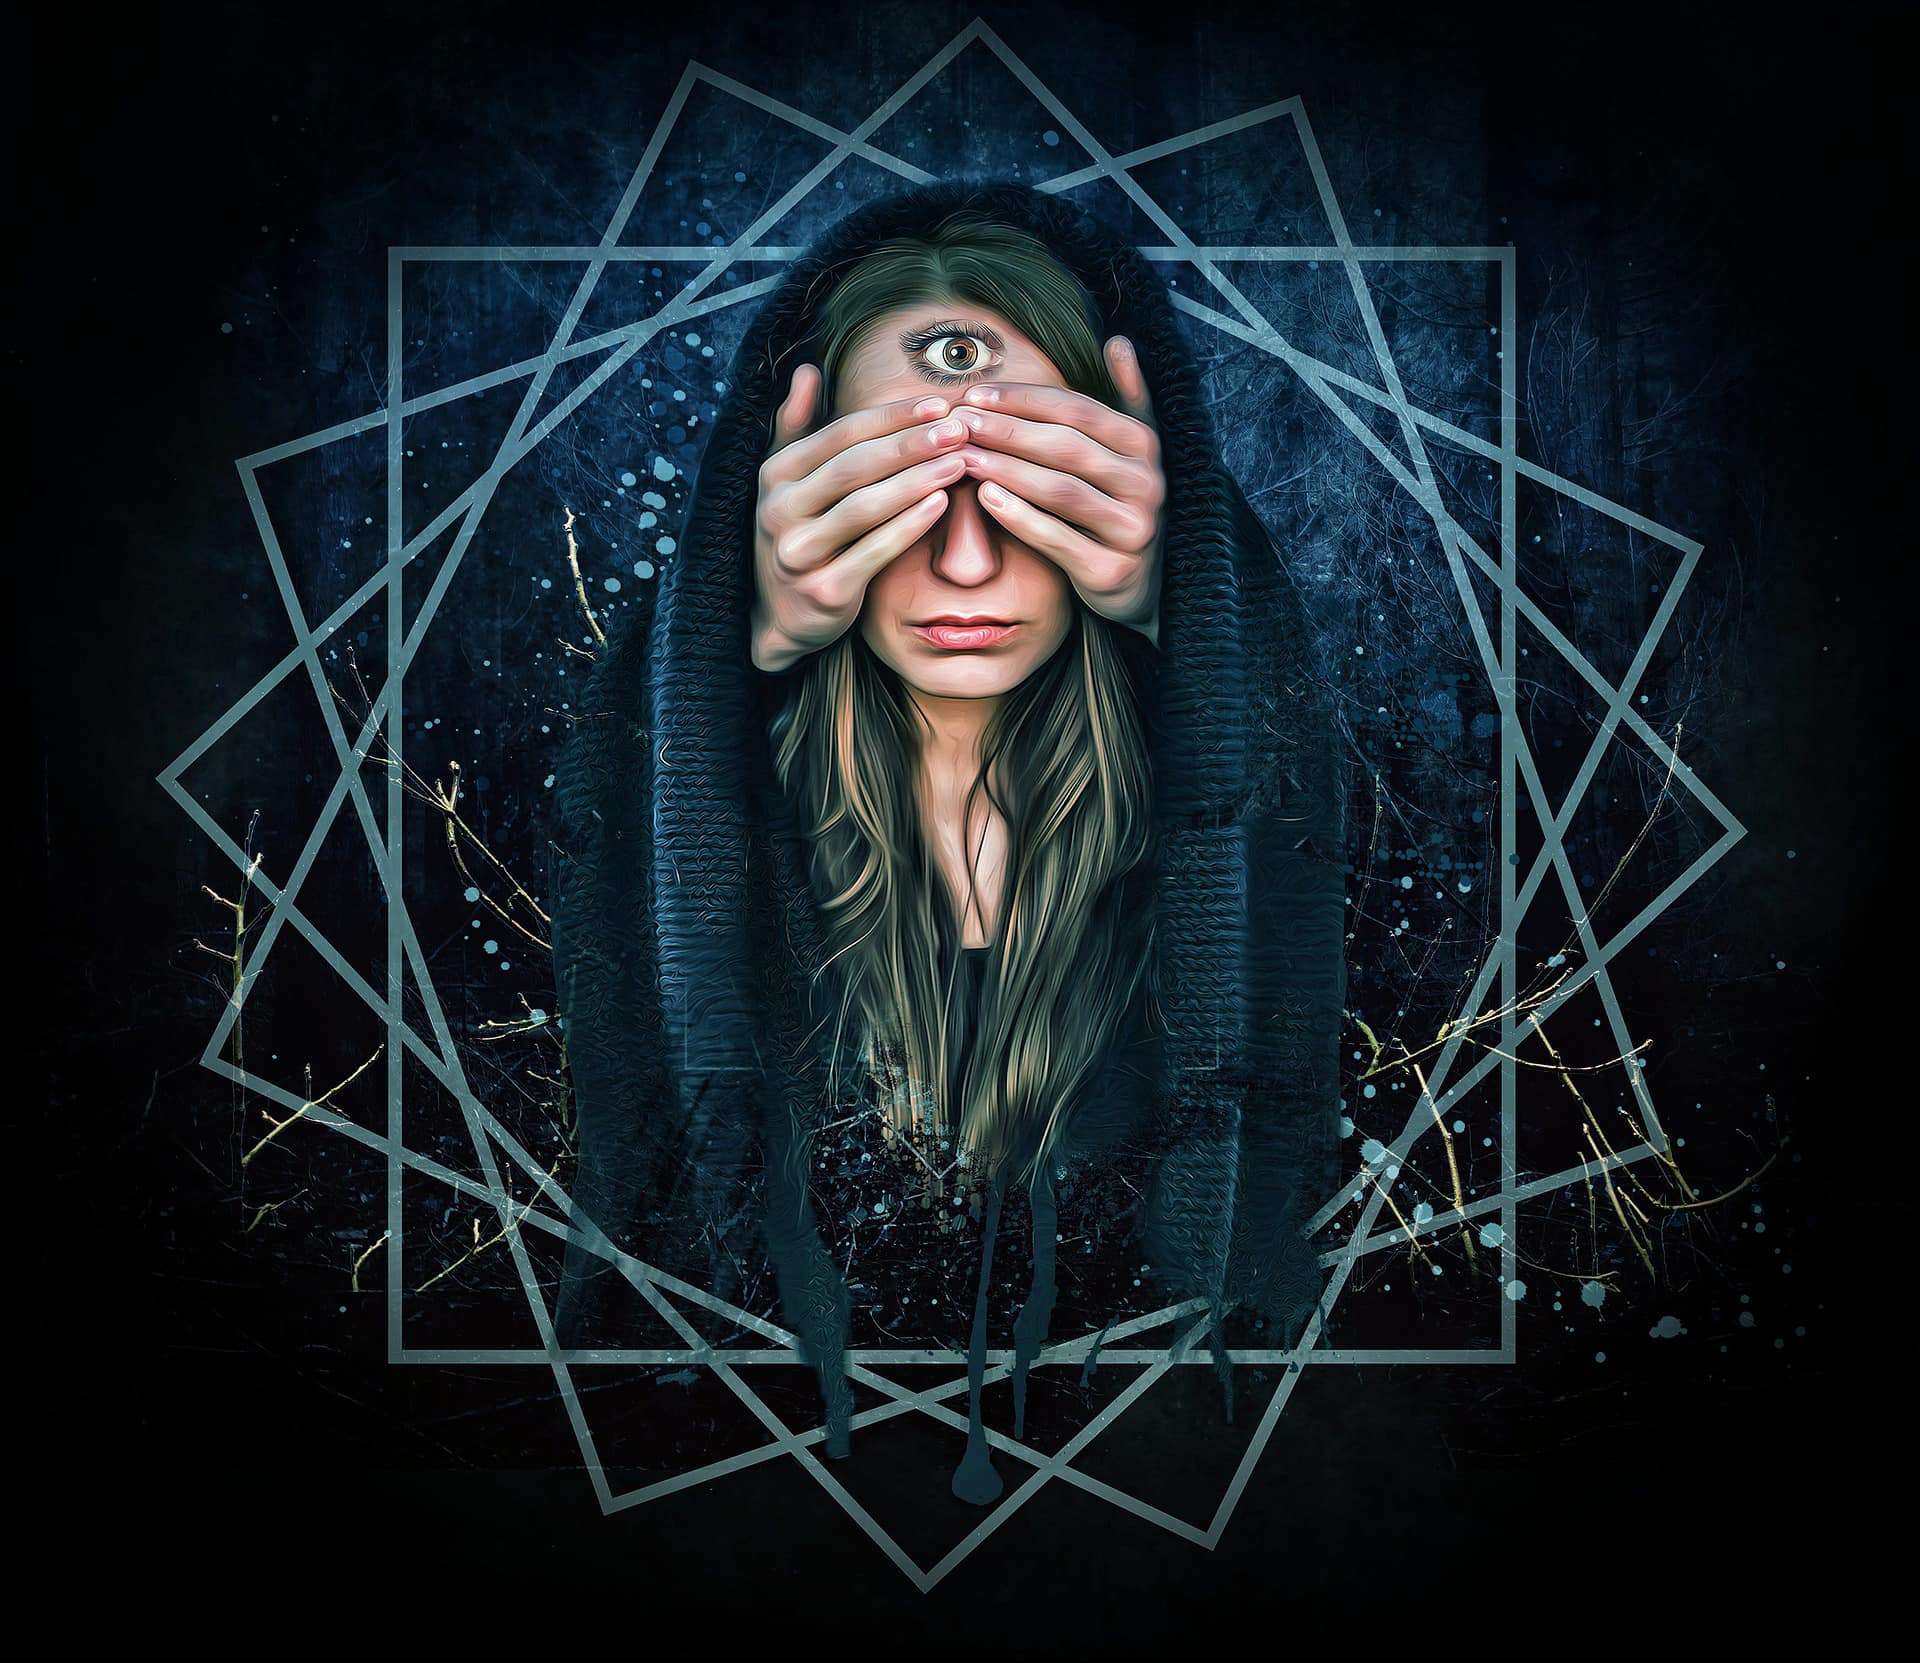 4 Psychic Abilities You May Have – And How to Find Out